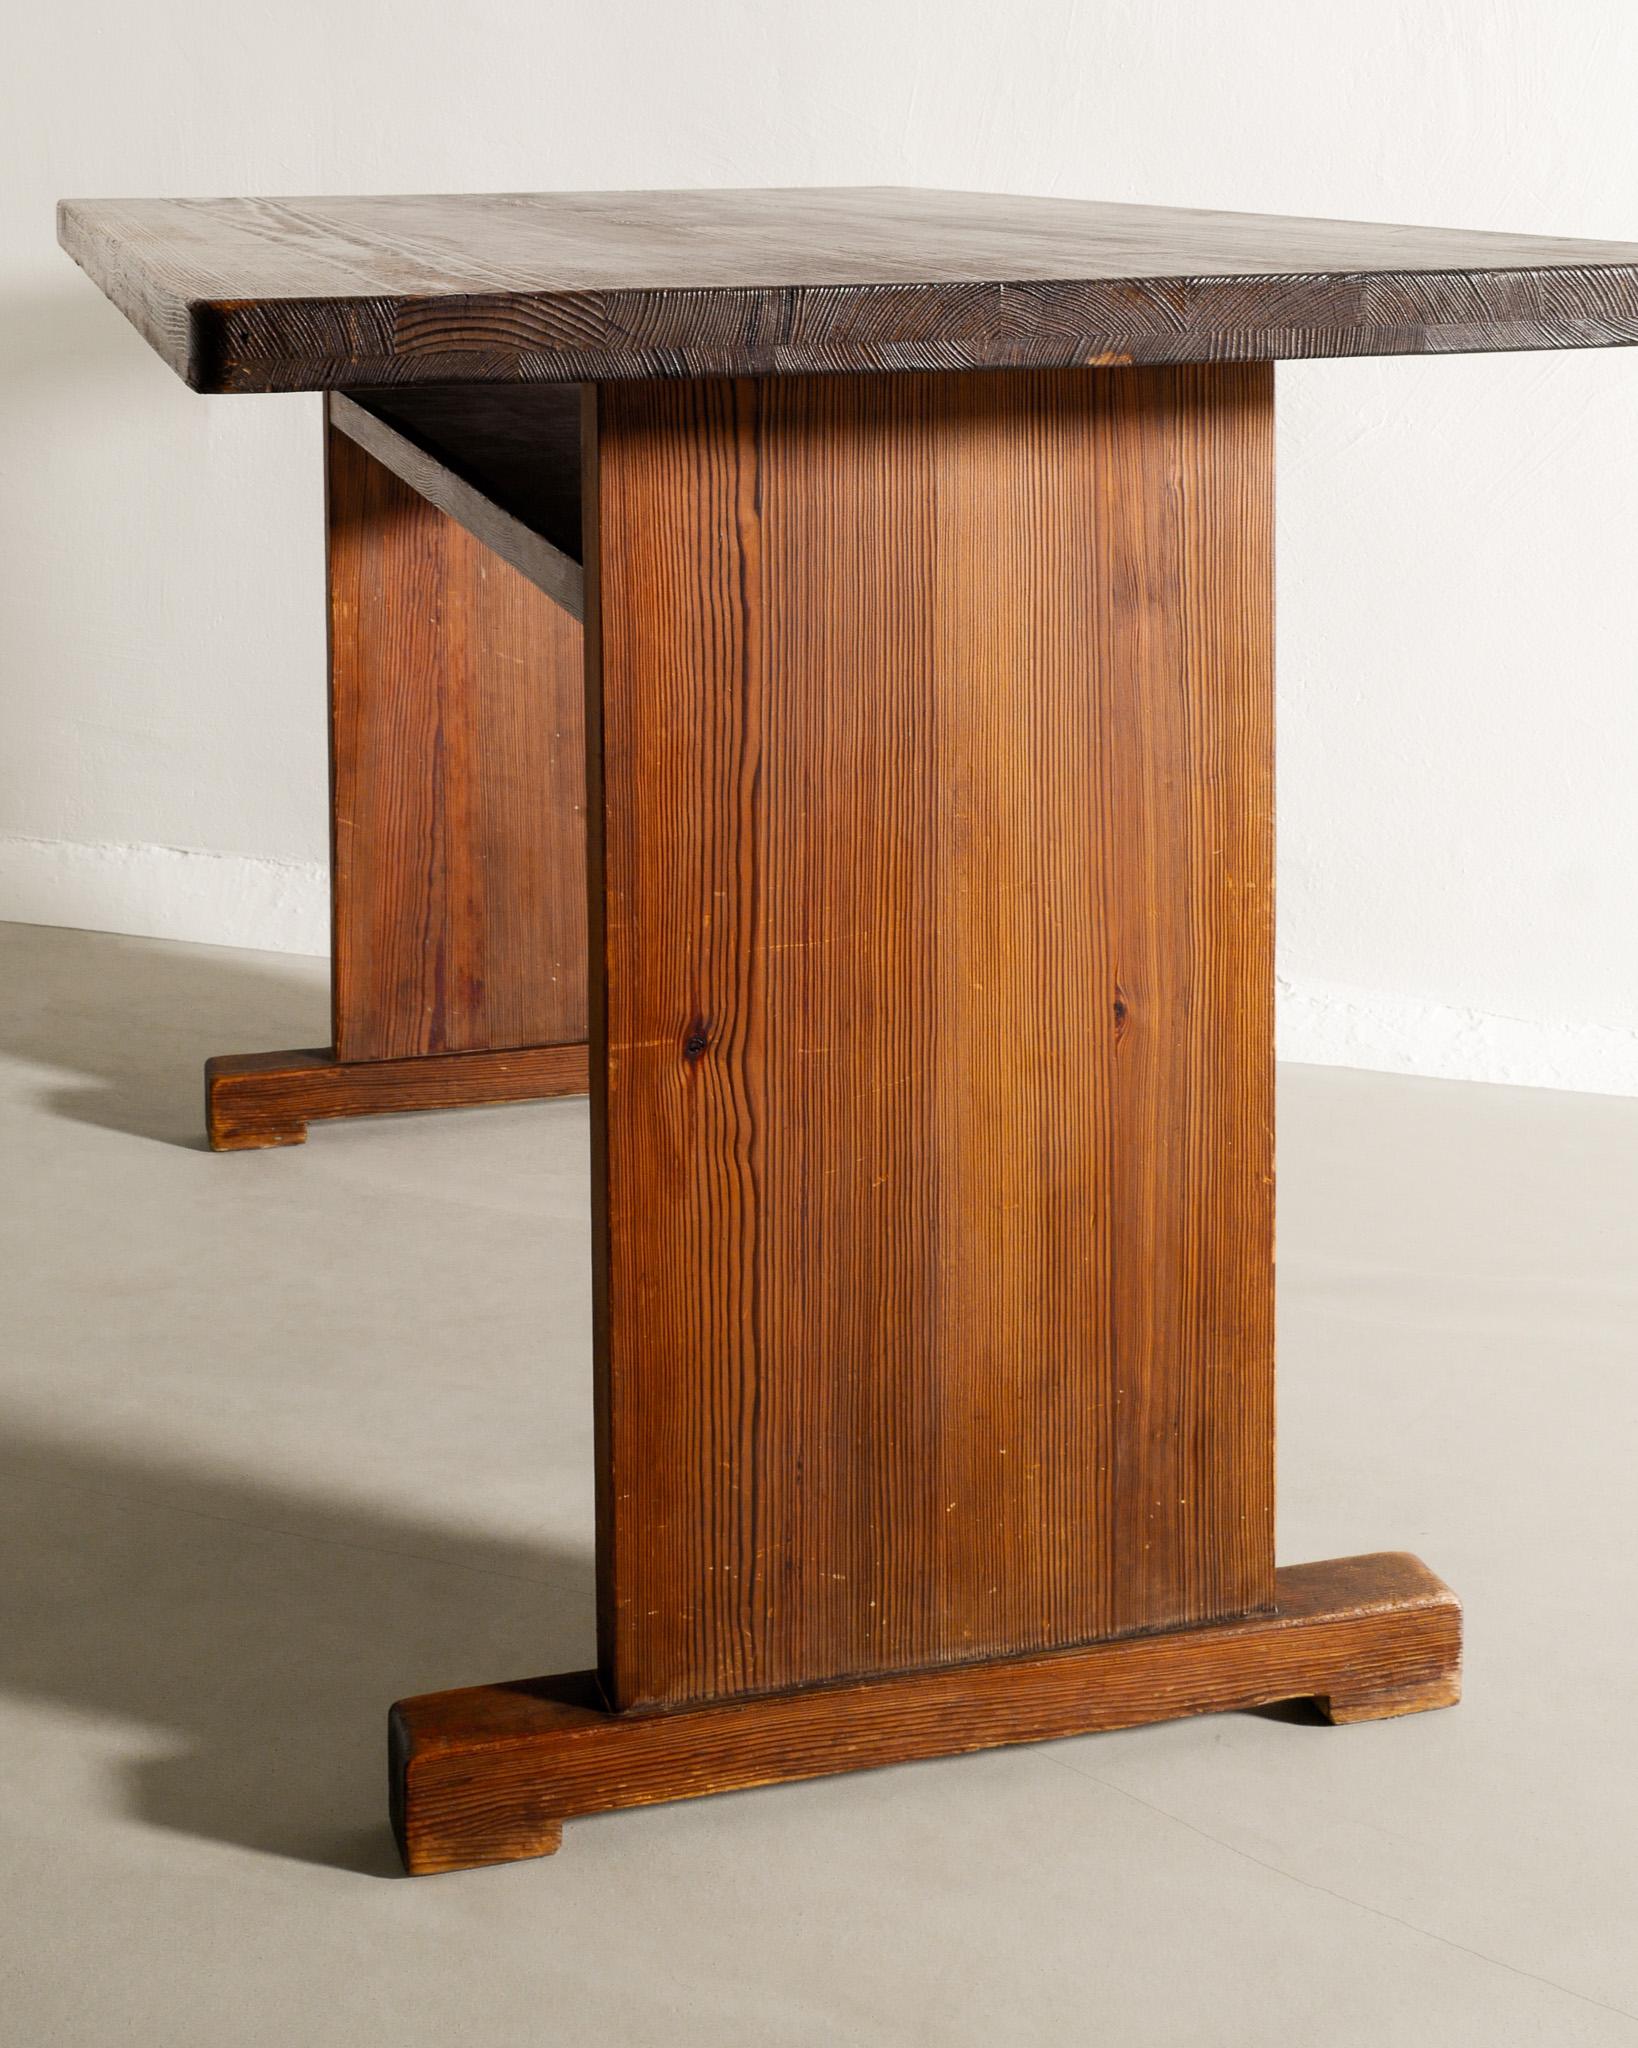 Swedish Pine Table / Desk in style of Axel Einar Hjorth Produced in Sweden 1930s For Sale 2